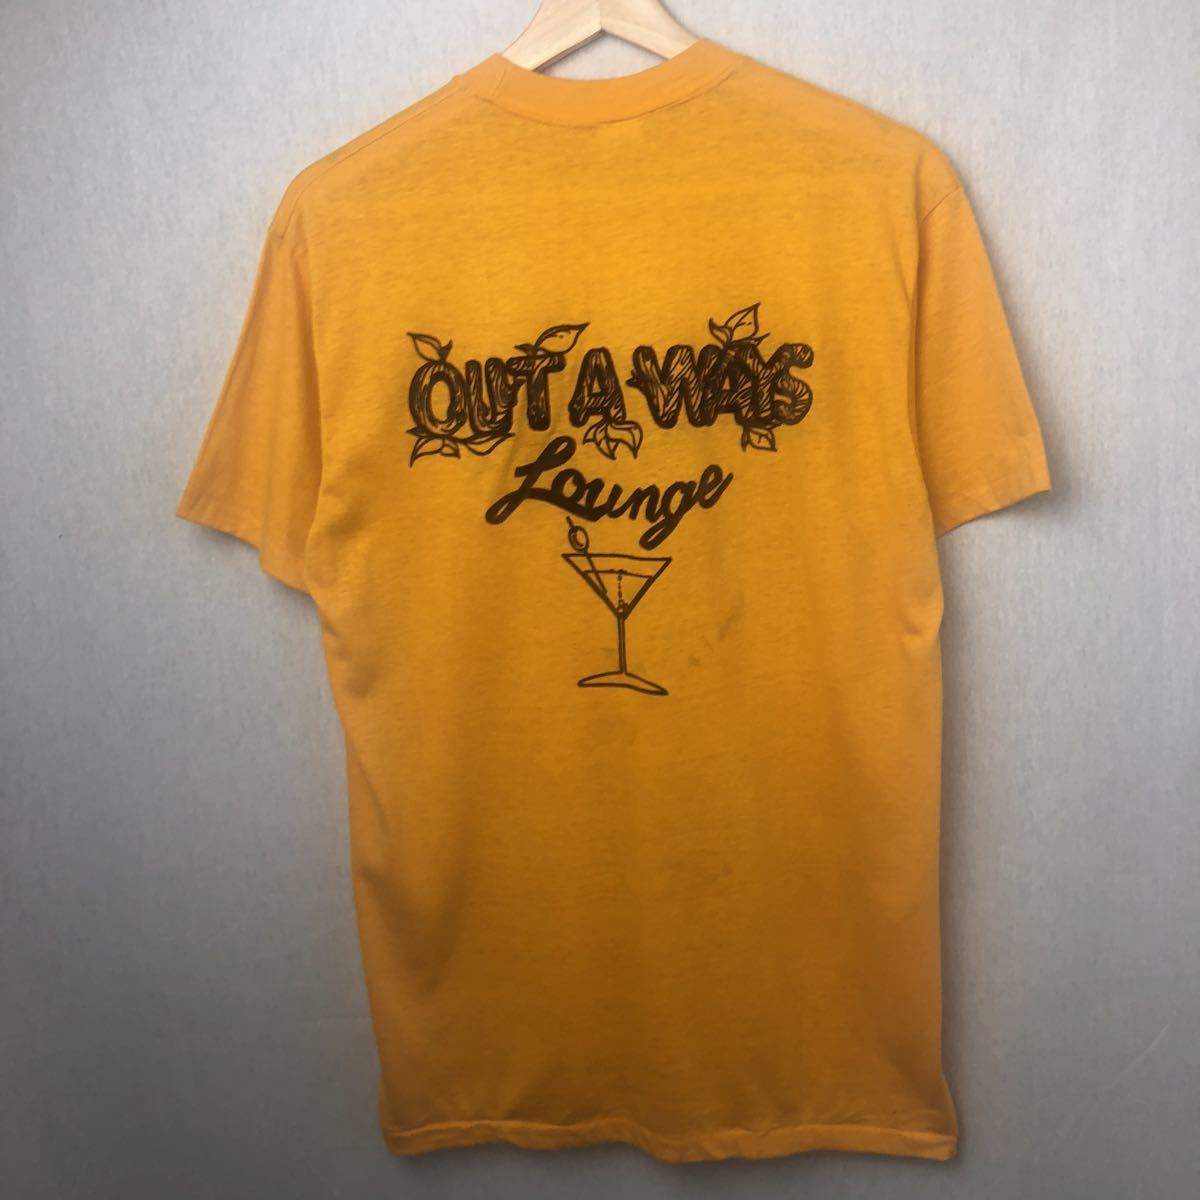 70s SPORT-T OUT A WAYS LOUNGE フロッキープリントTシャツ 1970s VINTAGE ビンテージ MADE IN USA_画像1